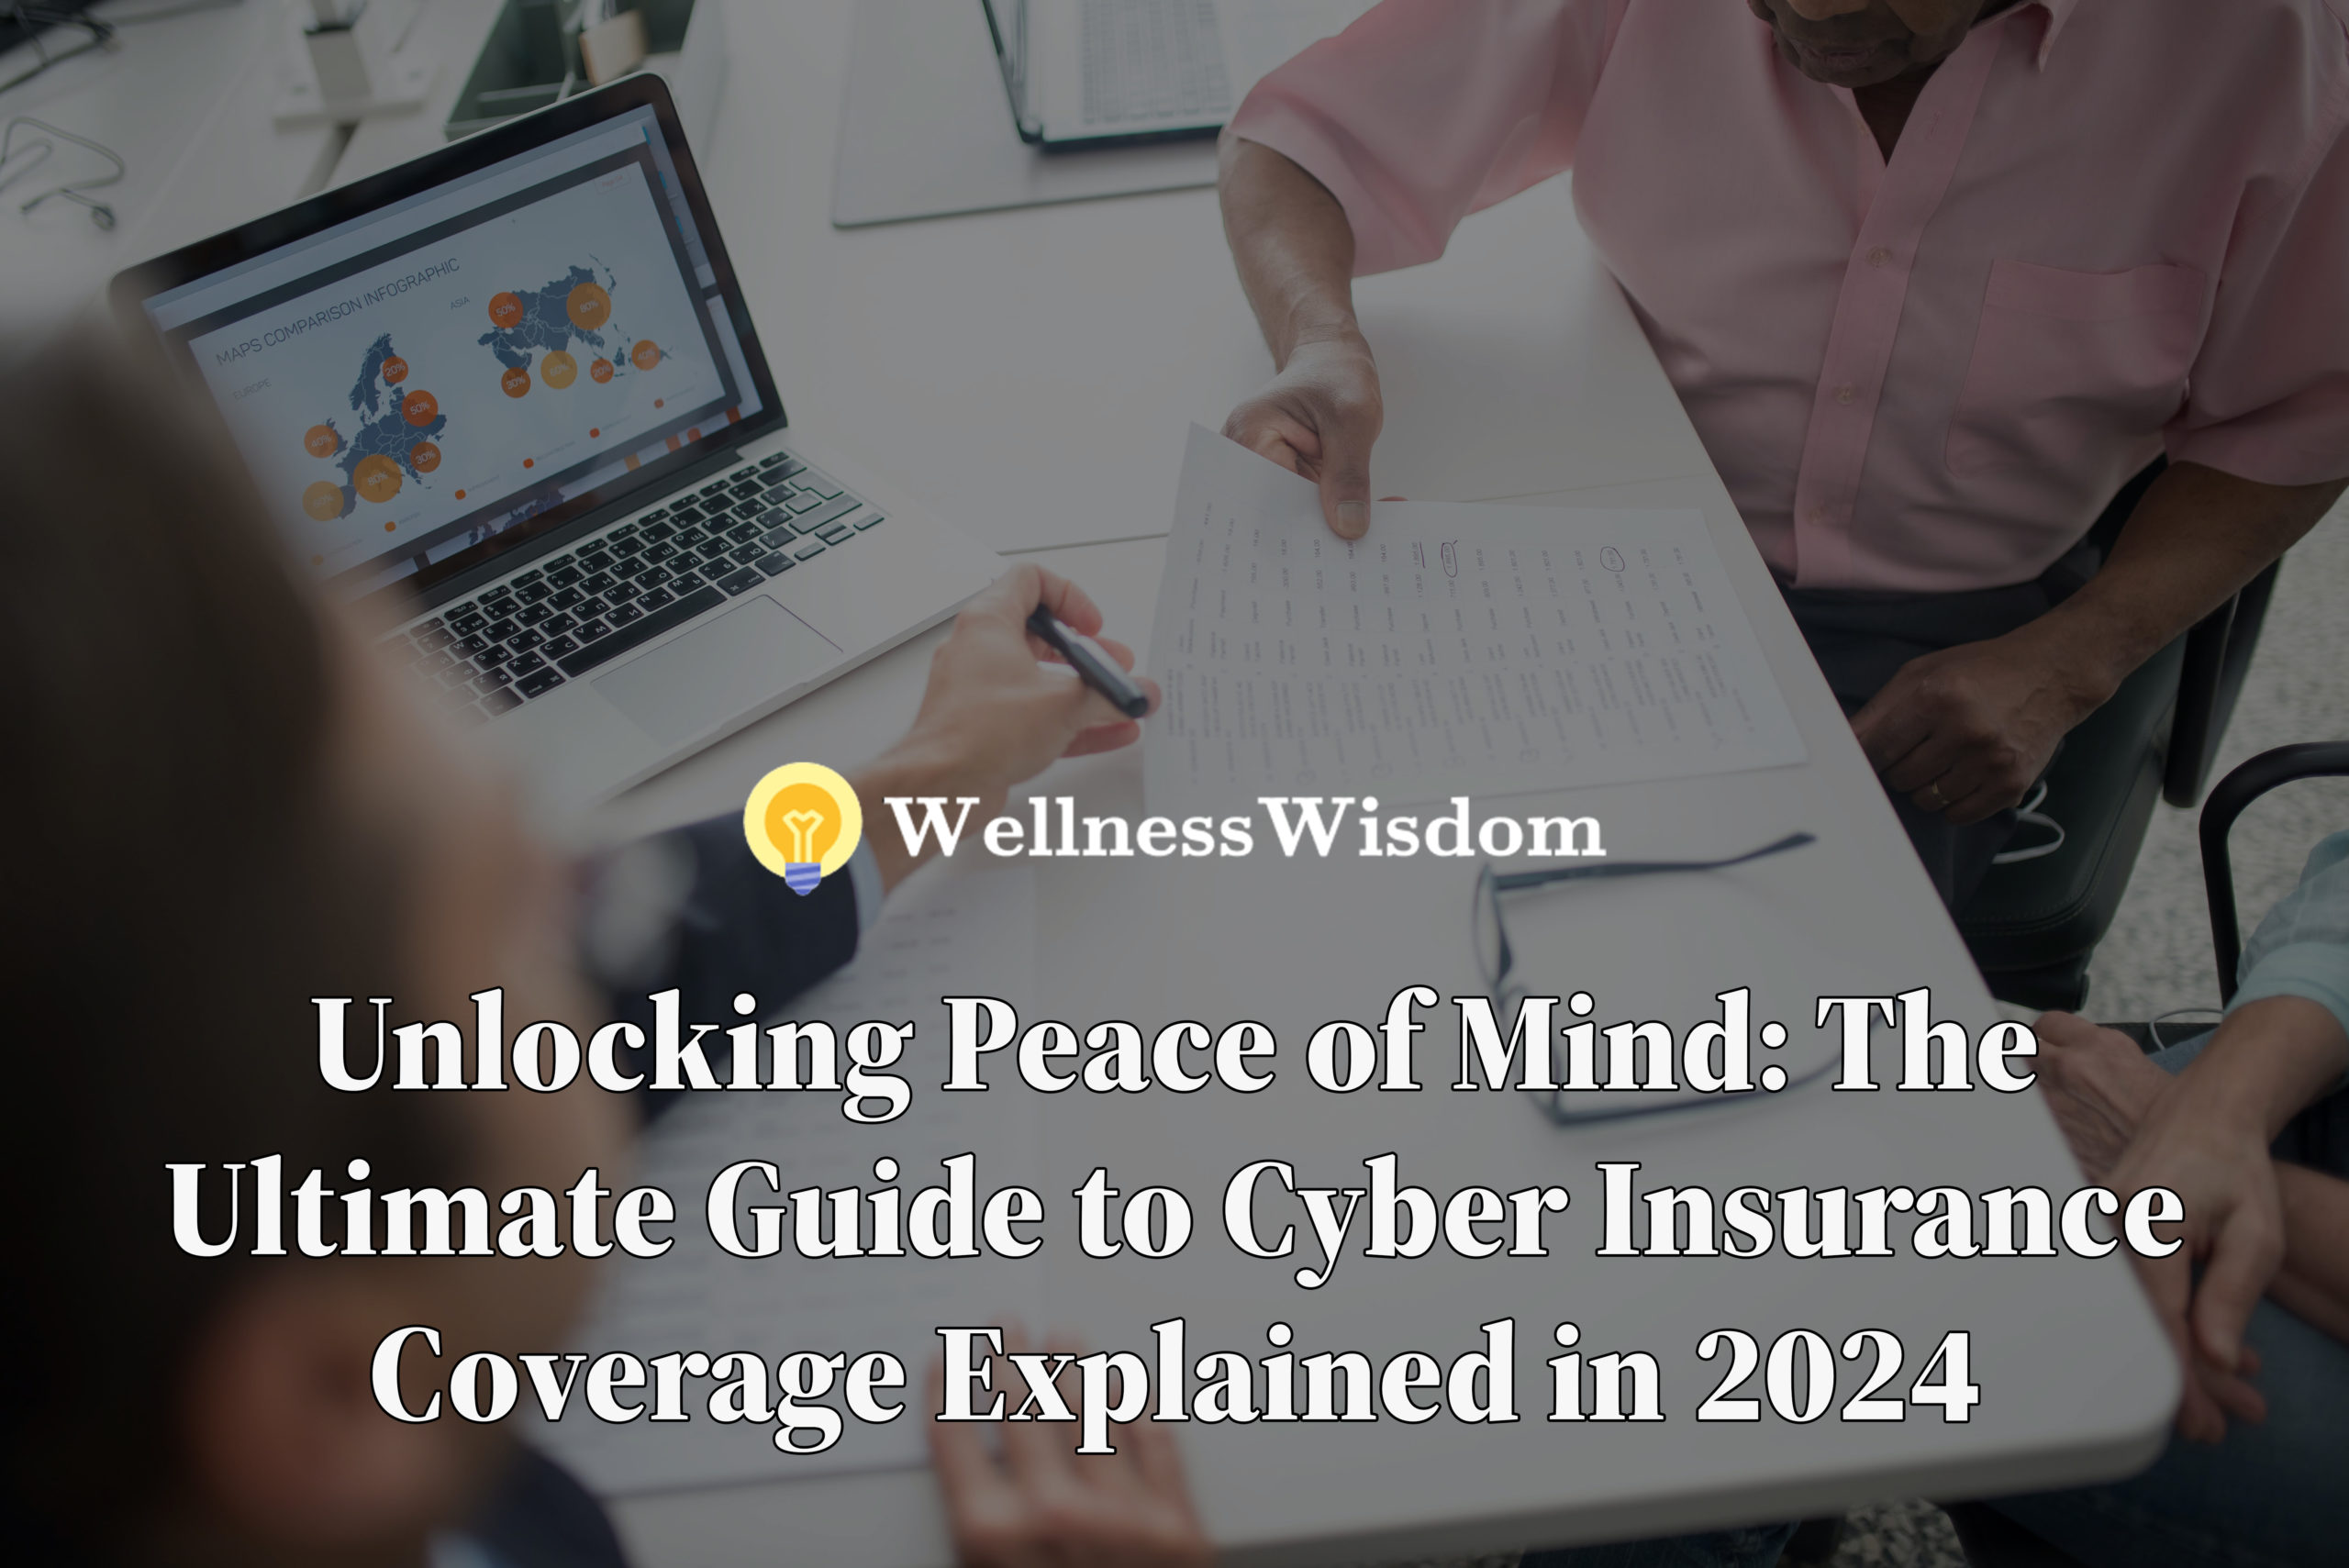 Unlocking Peace of Mind: The Ultimate Guide to Cyber Insurance Coverage Explained in 2024